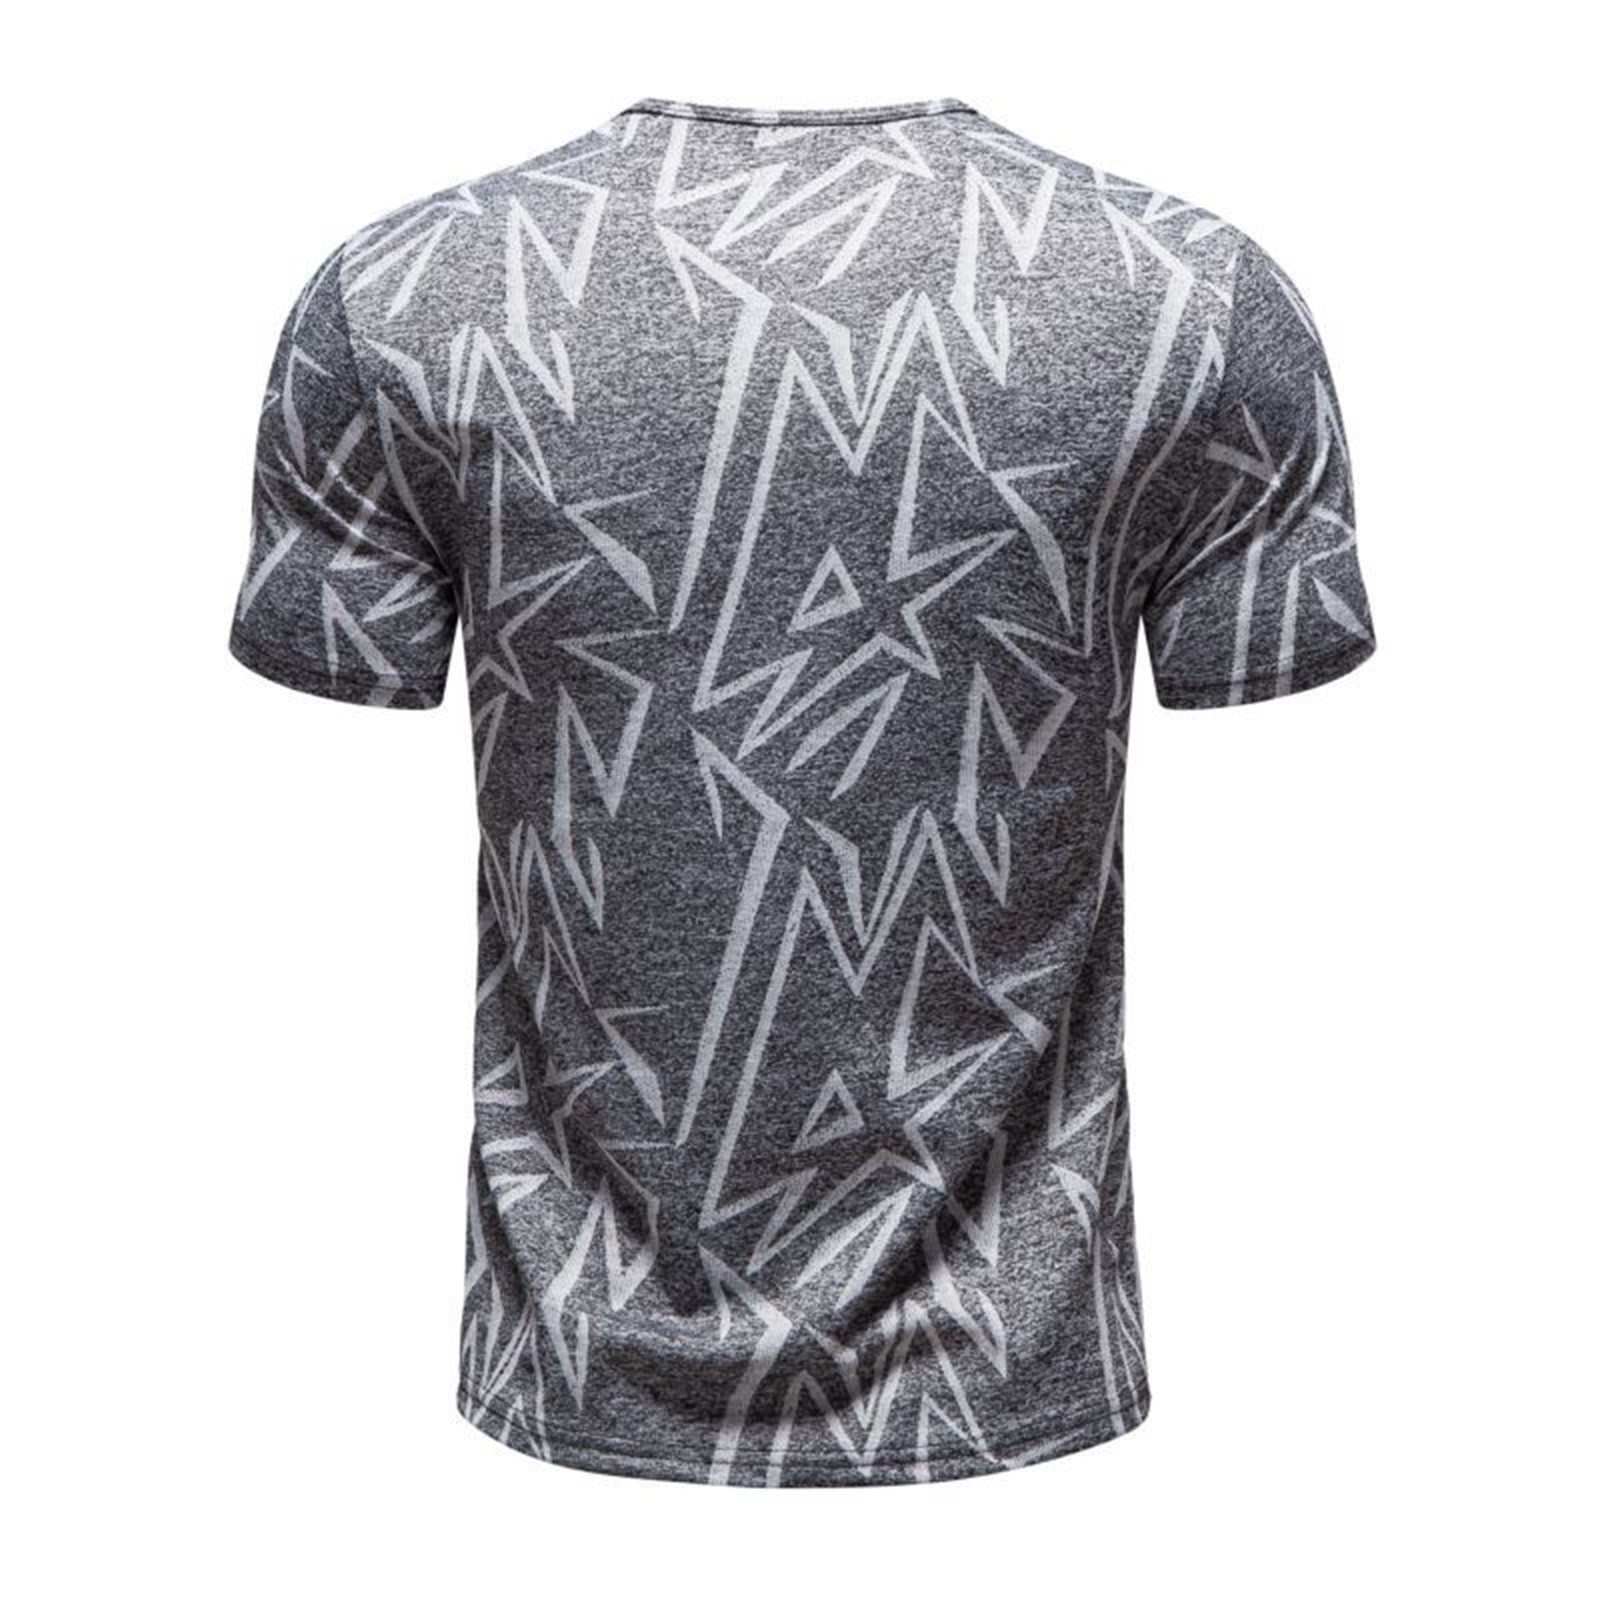 Lokdsa Clearance T Shirts for Man Men'S Spring Summer Sports Leisure ...